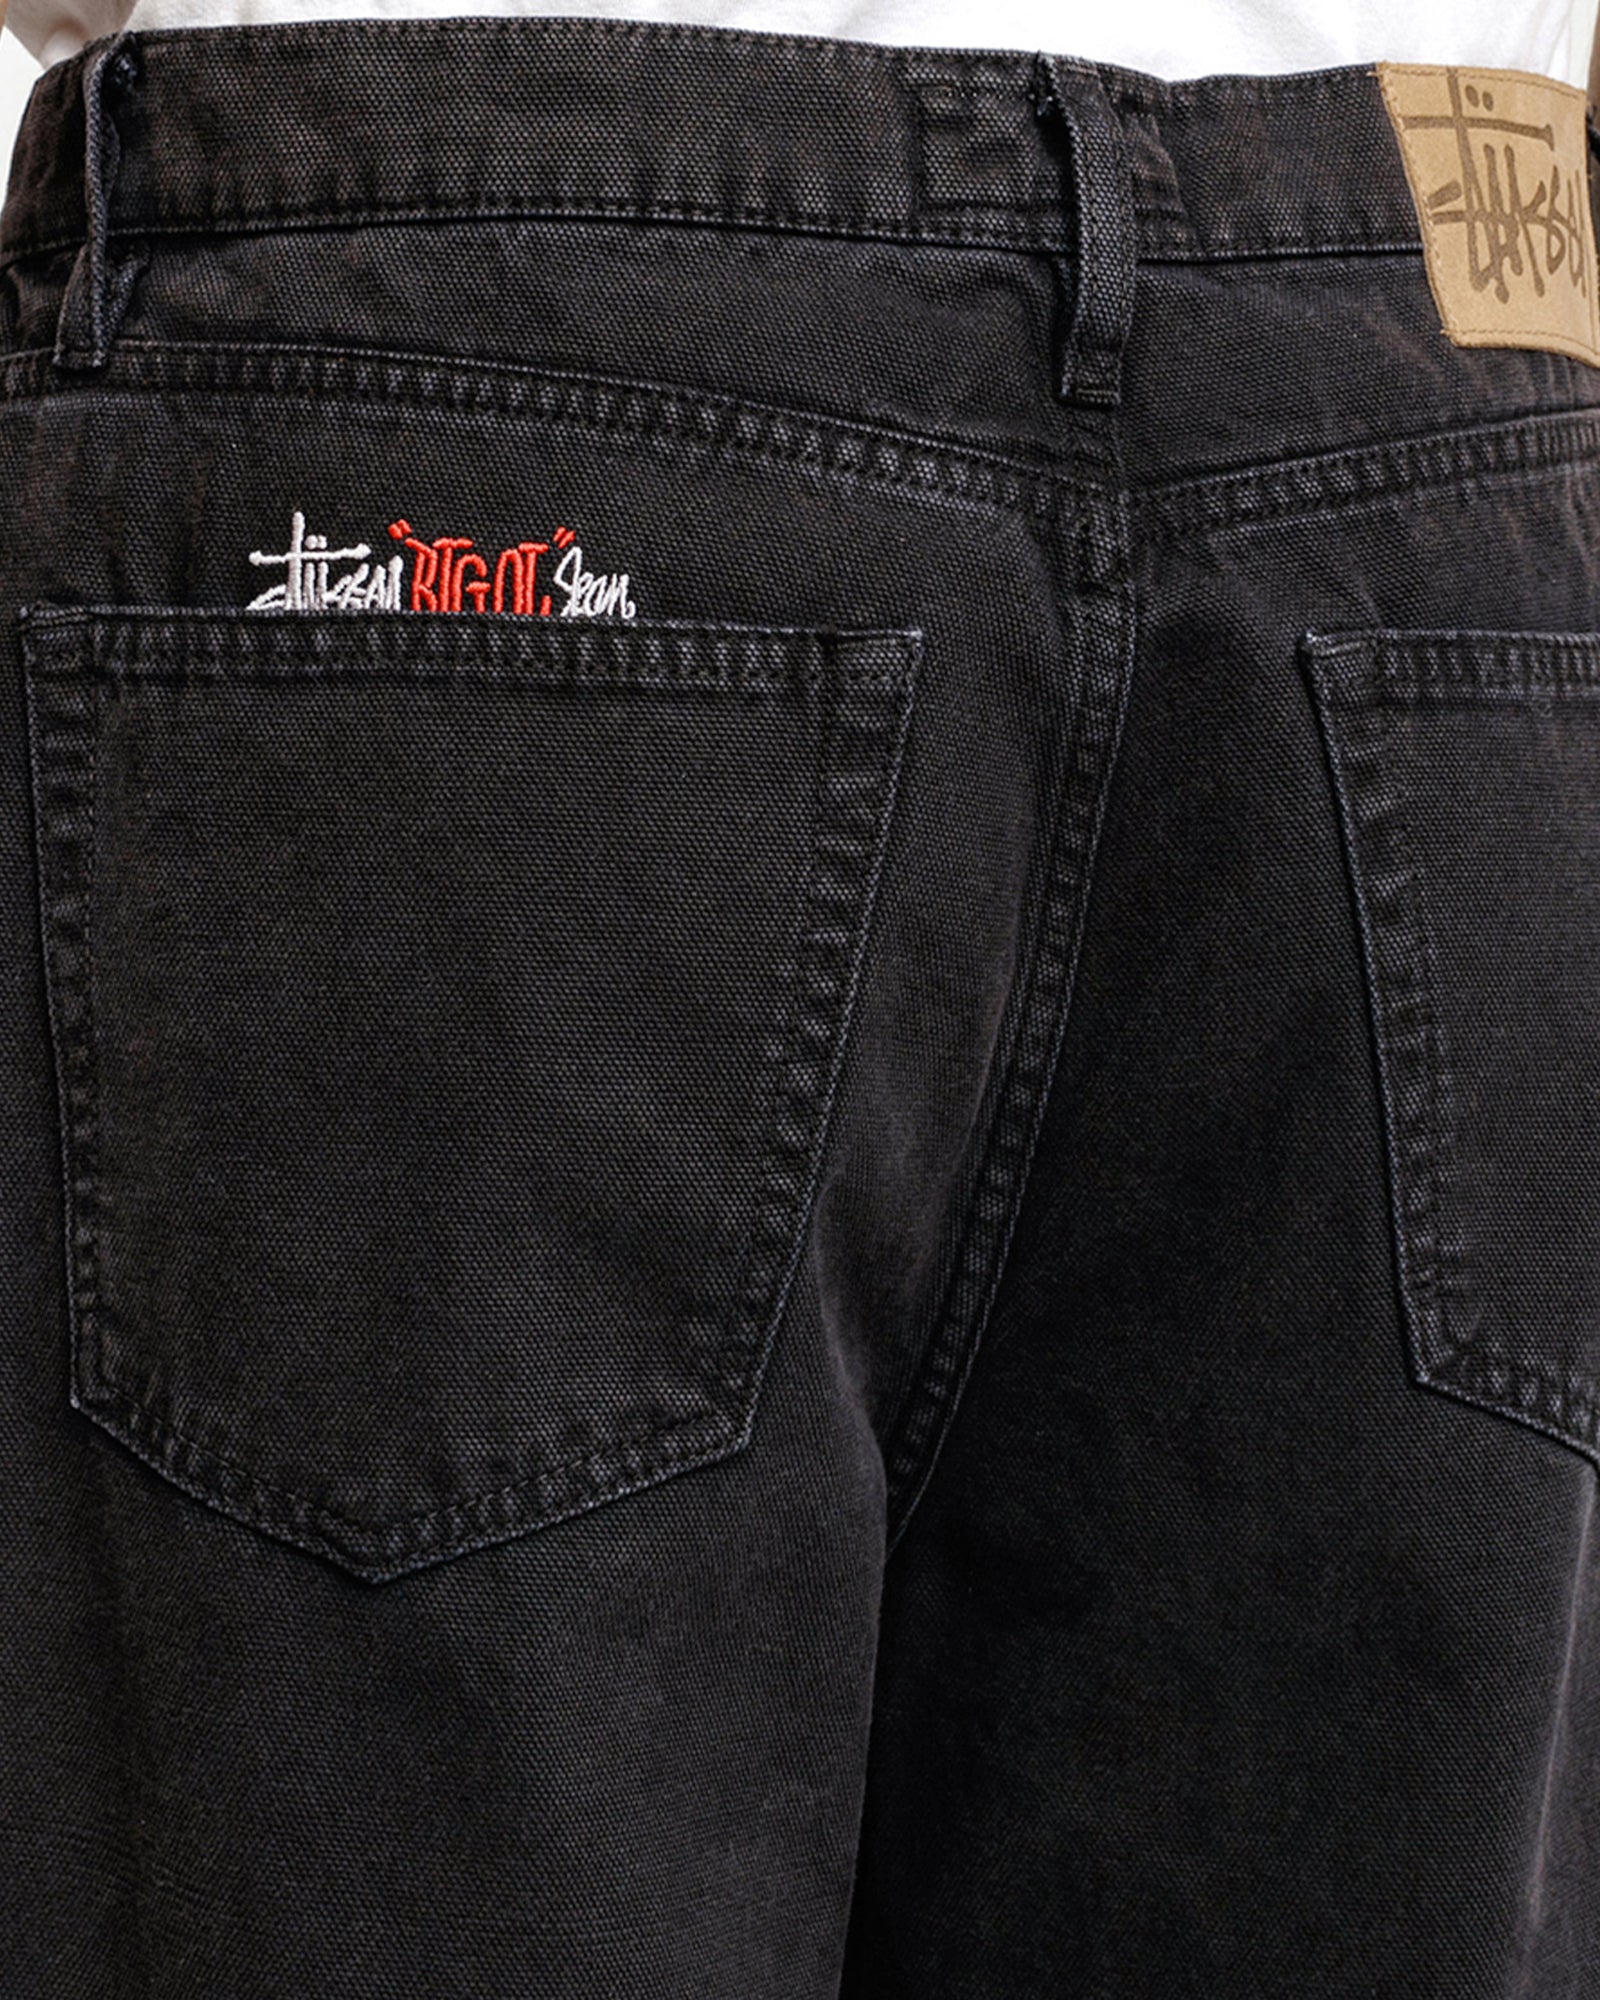 CLASSIC JEAN WASHED CANVAS BLACK BOTTOMS